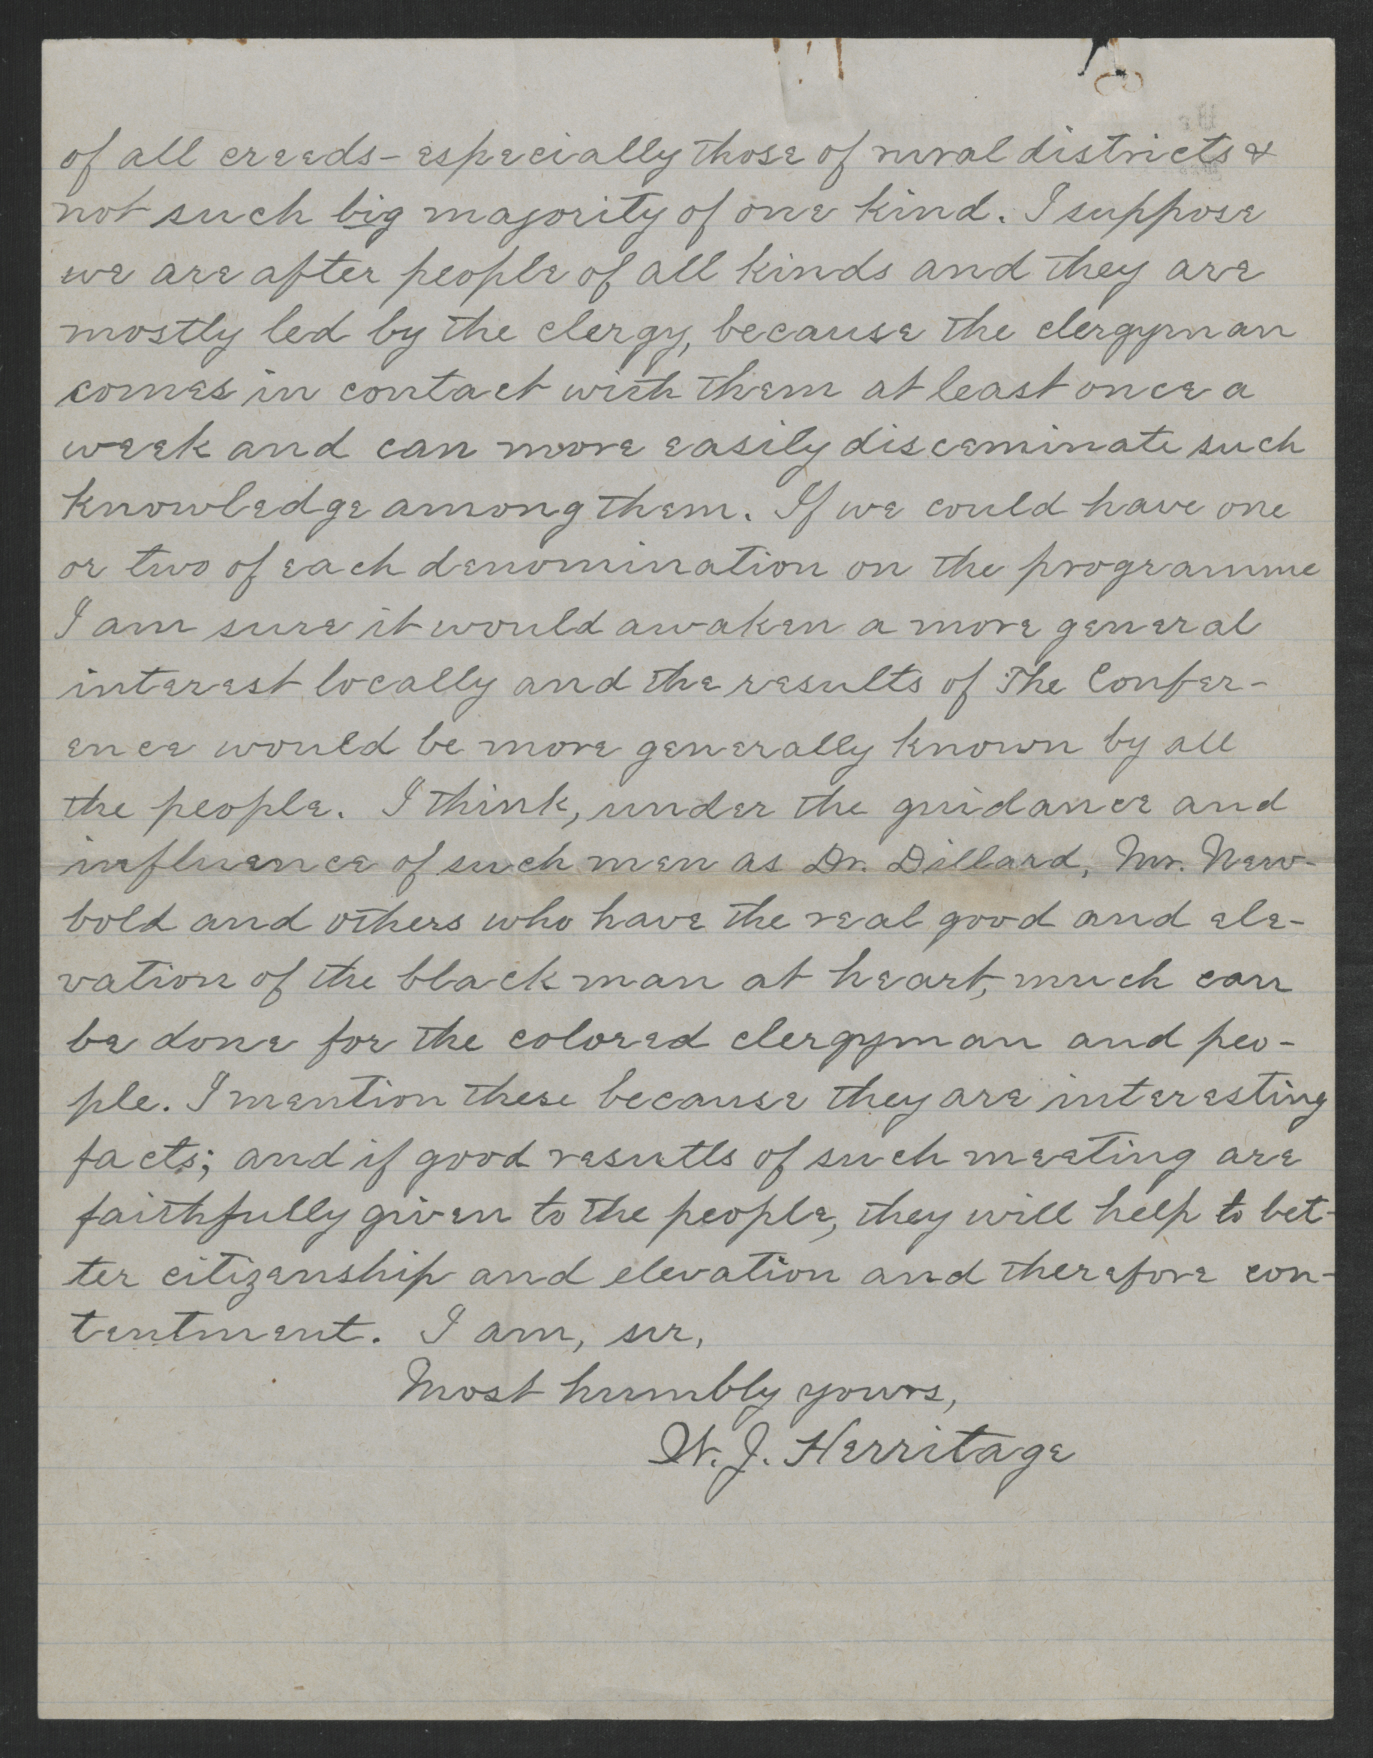 Letter from William J. Herritage to Gov. Thomas W. Bickett, July 14, 1919, page 4